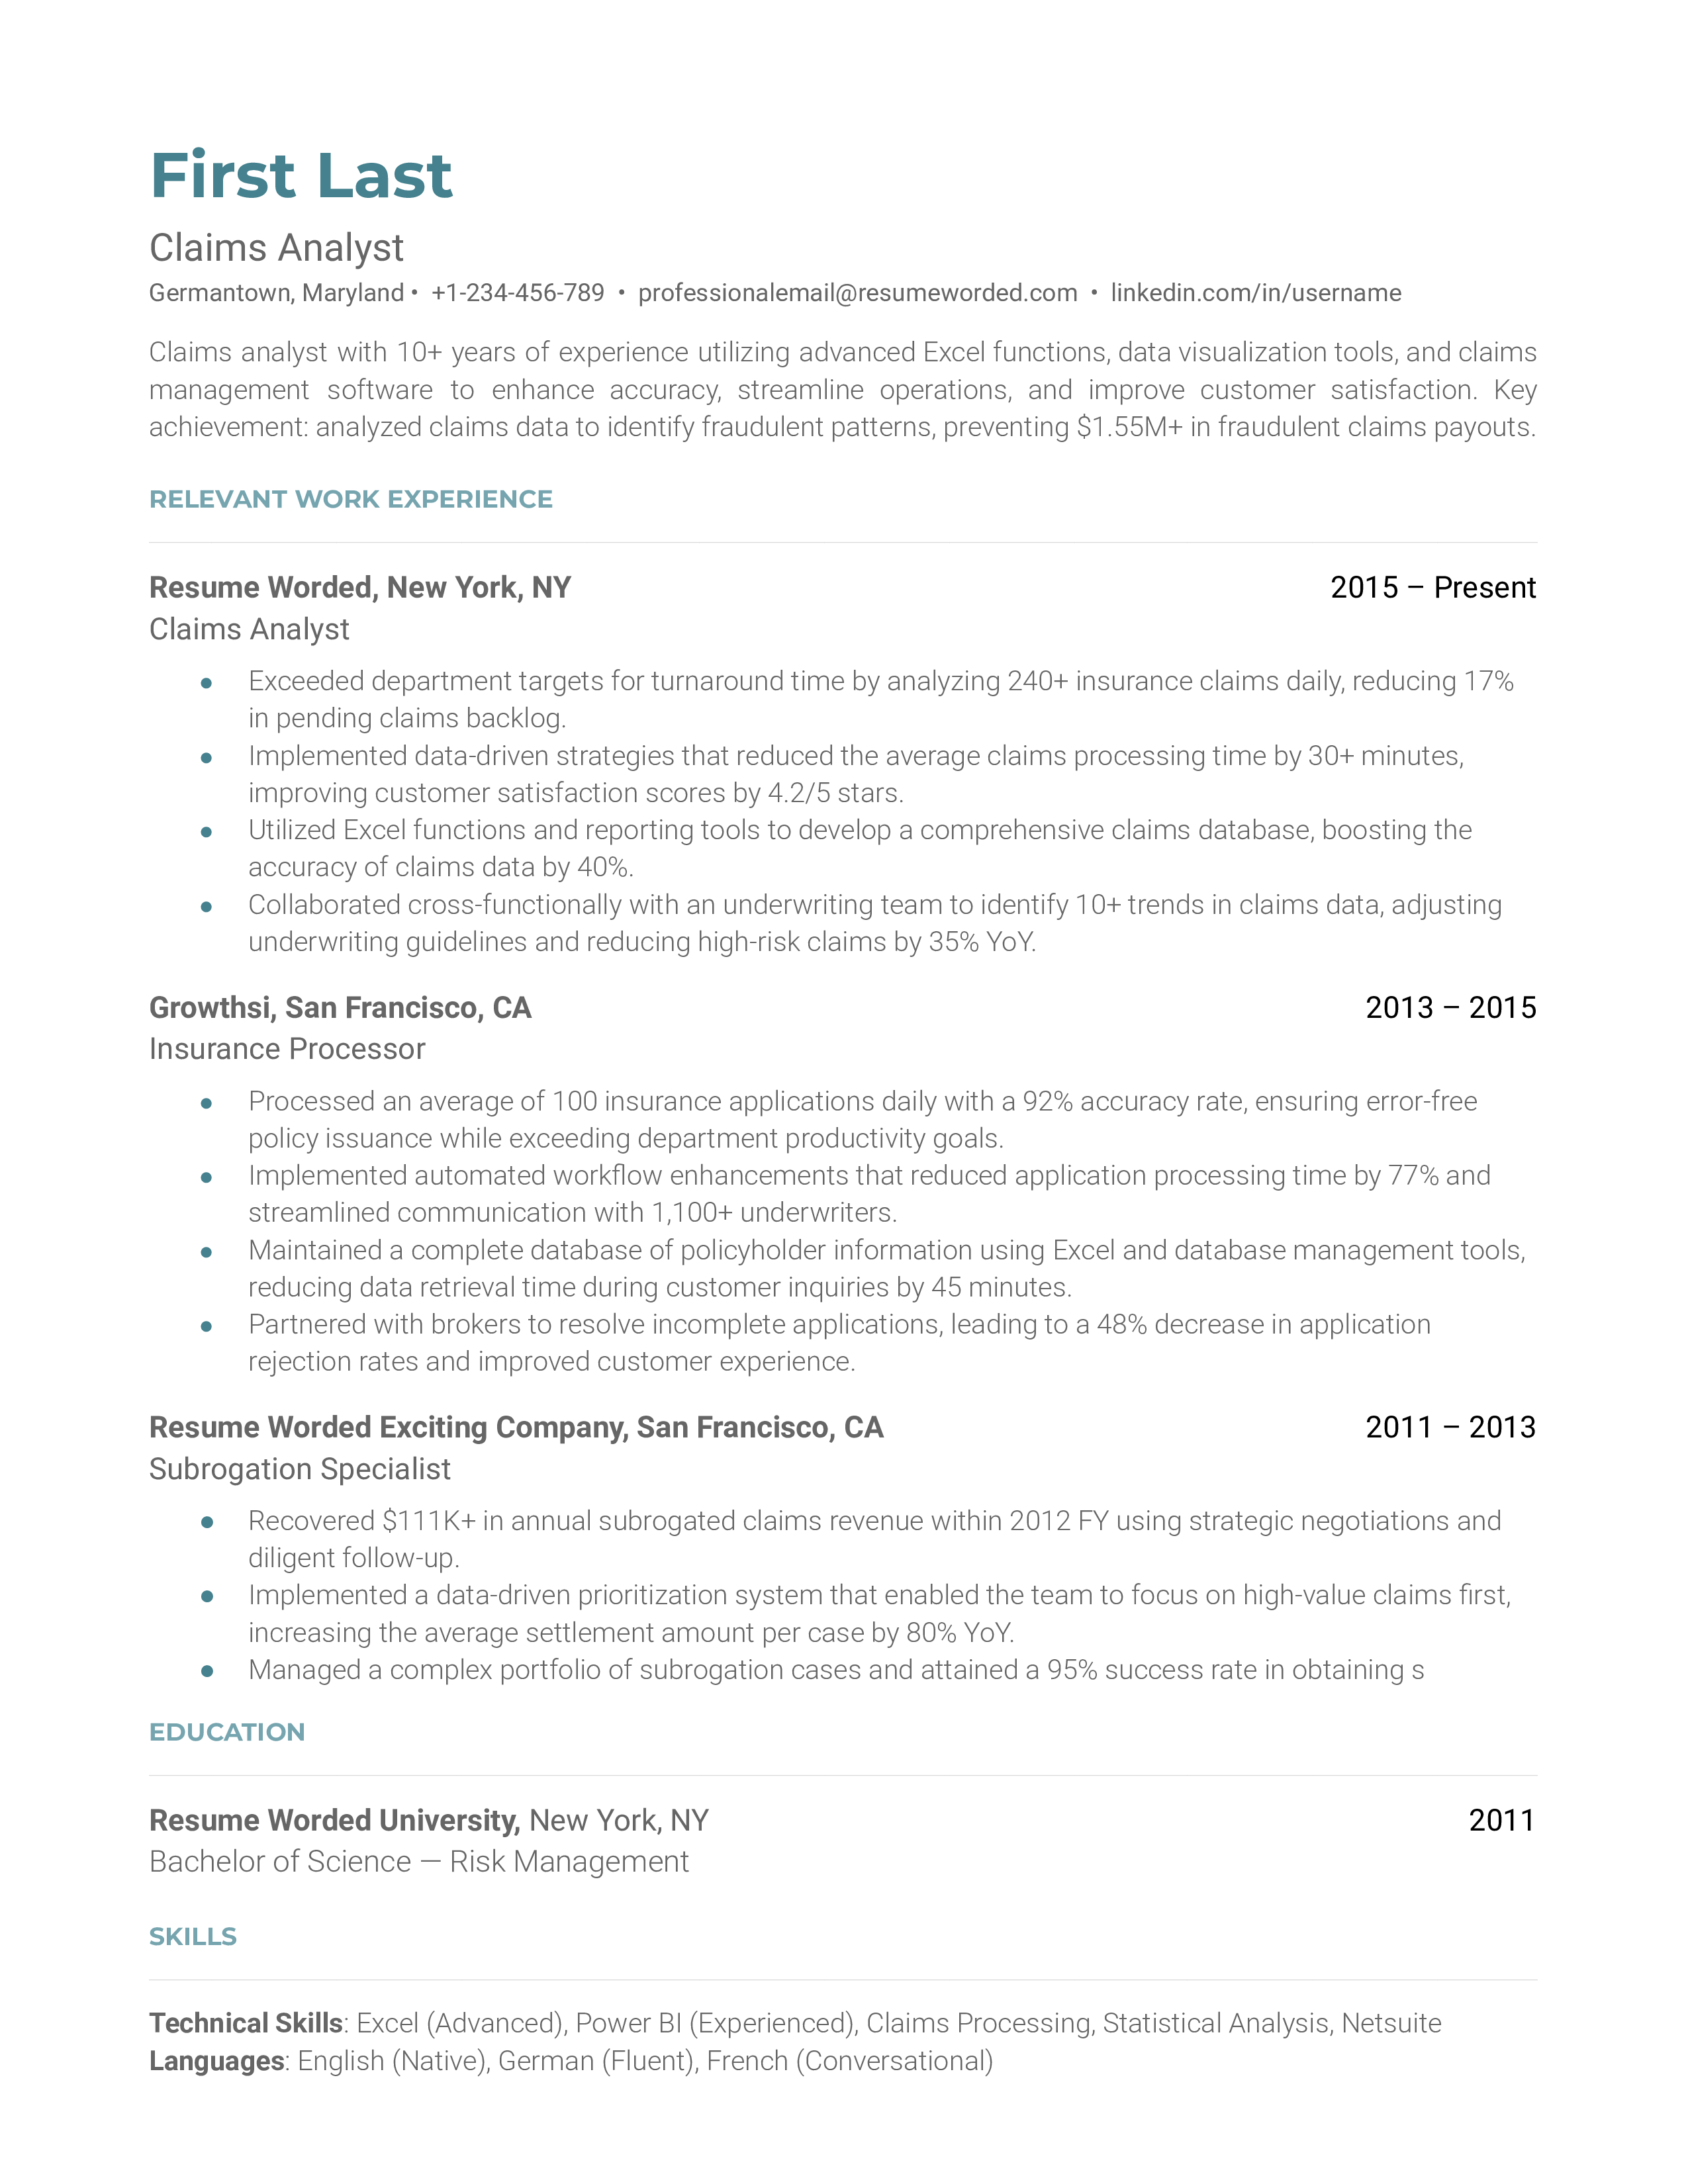 A professional resume showcasing skills and experience relevant for a Claims Analyst role.